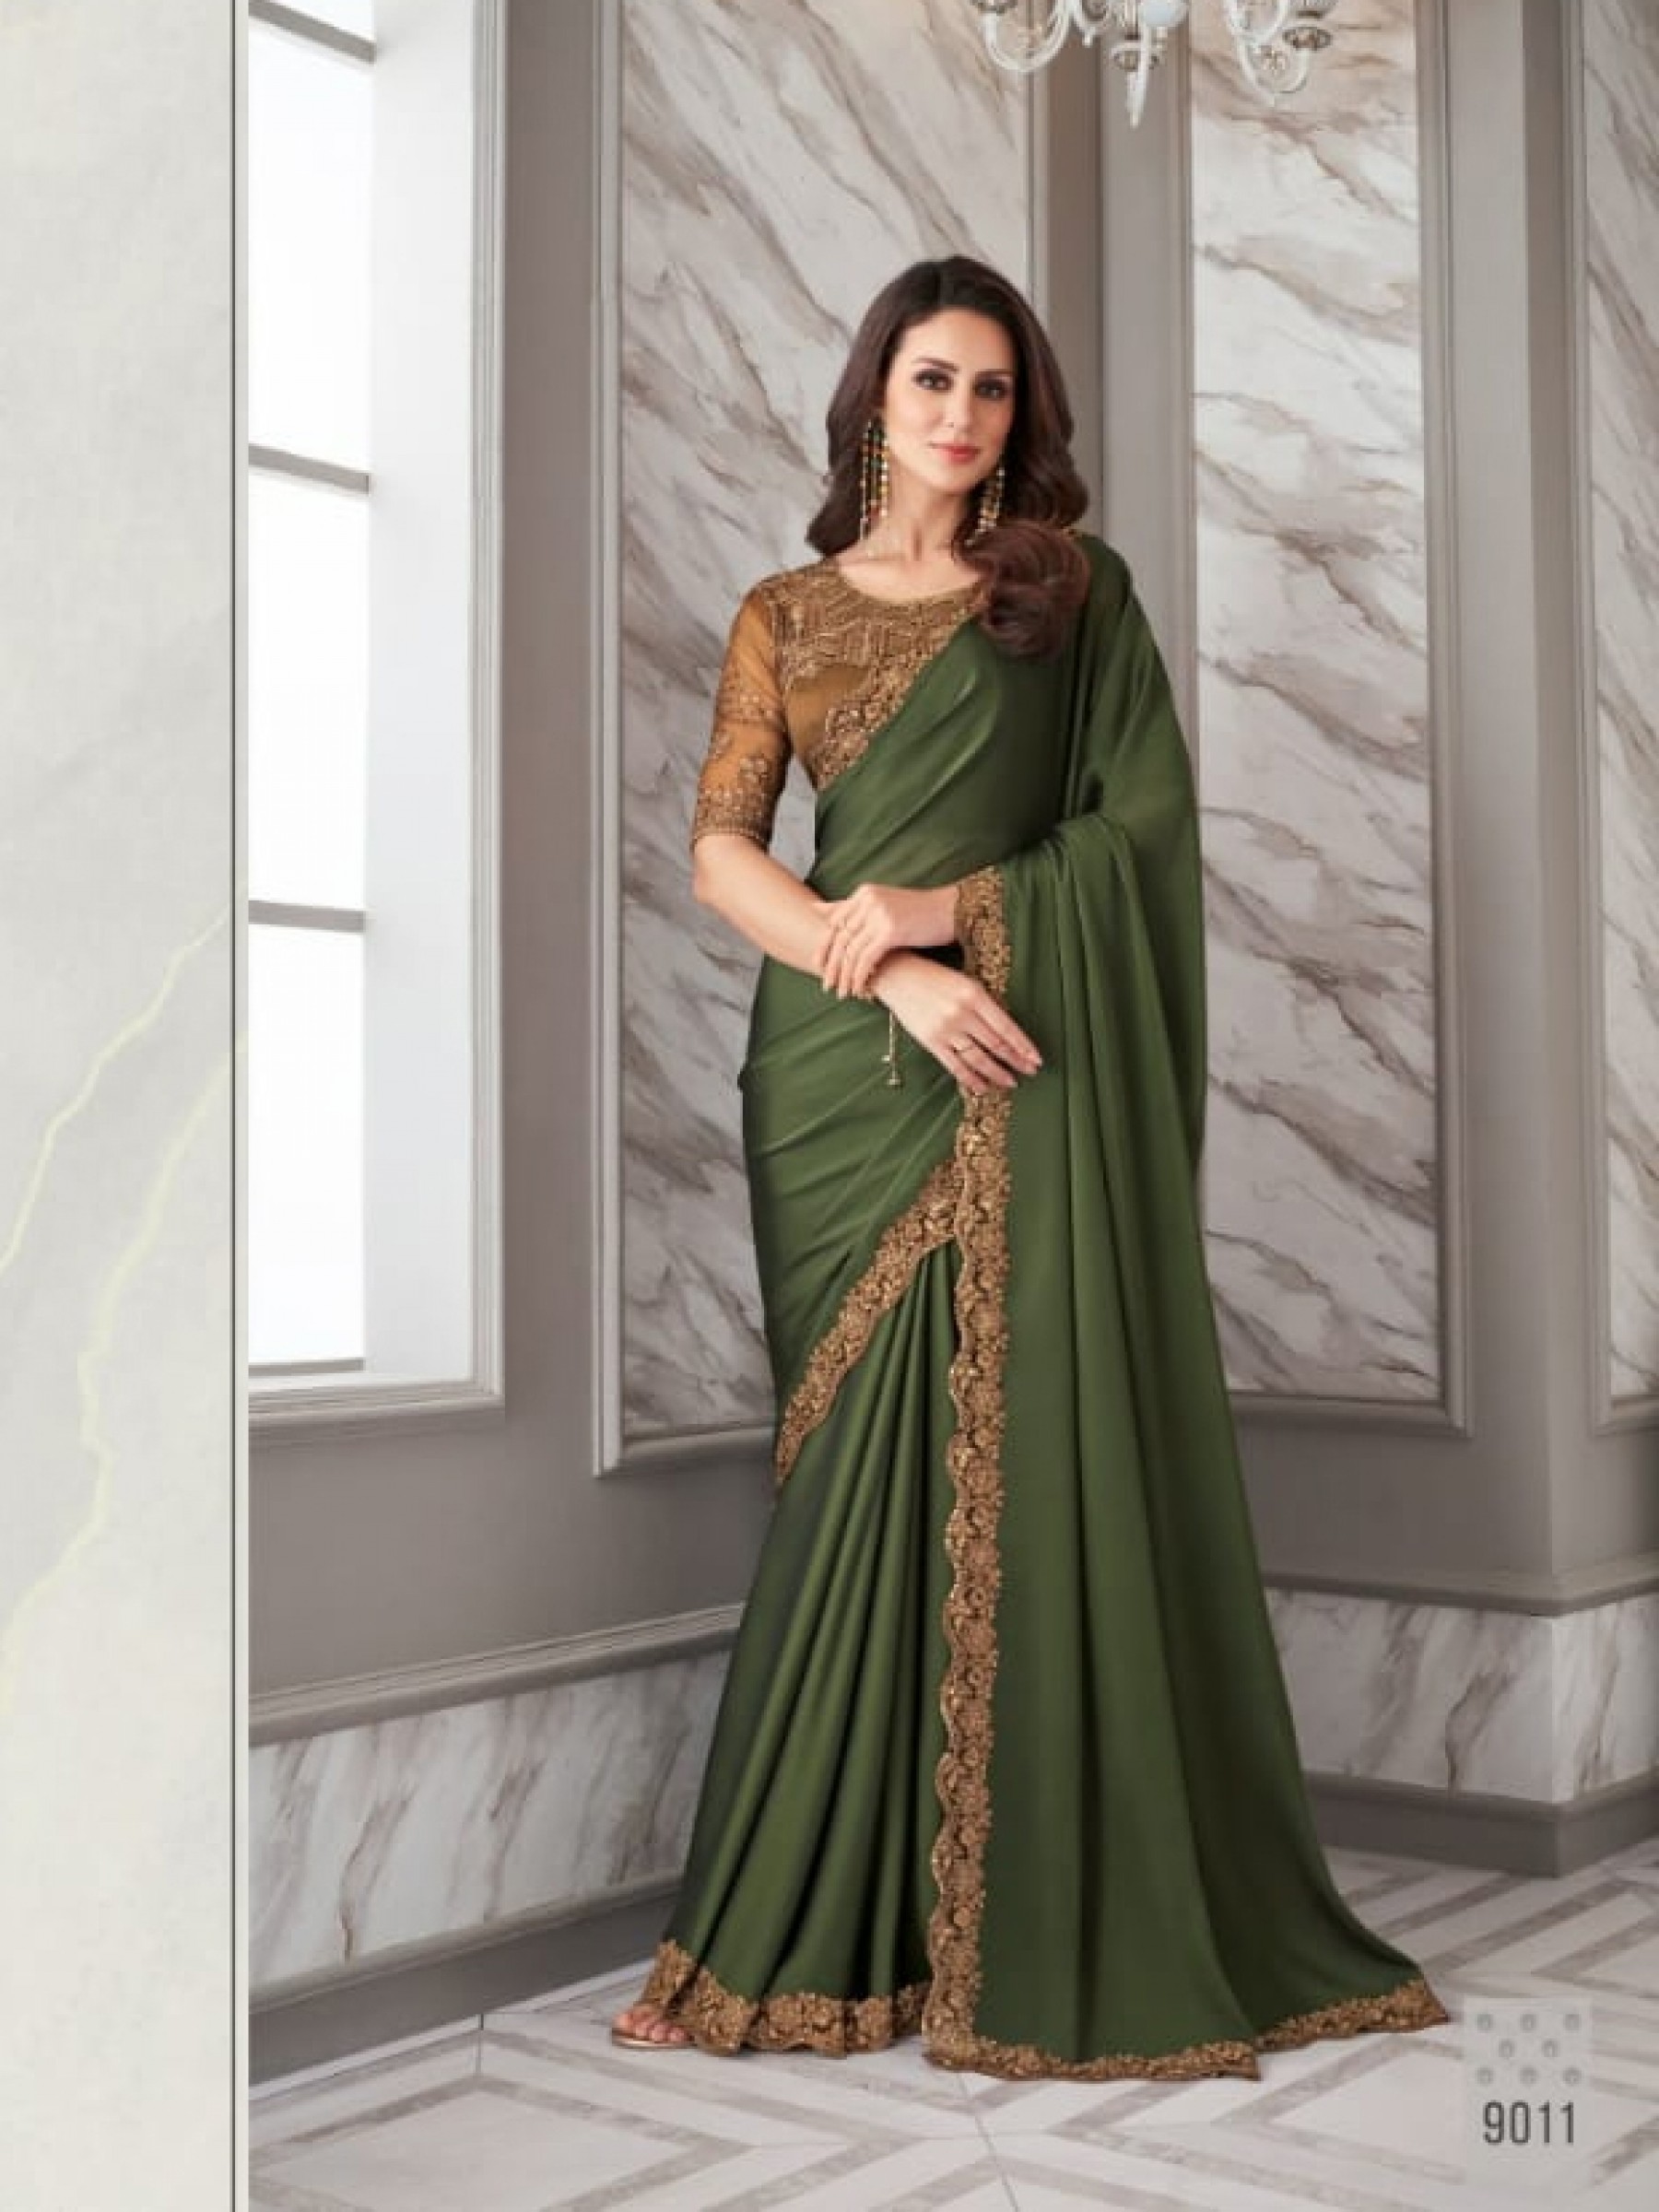  Georgette Party Wear  Saree In Green Color With Embroidery Work